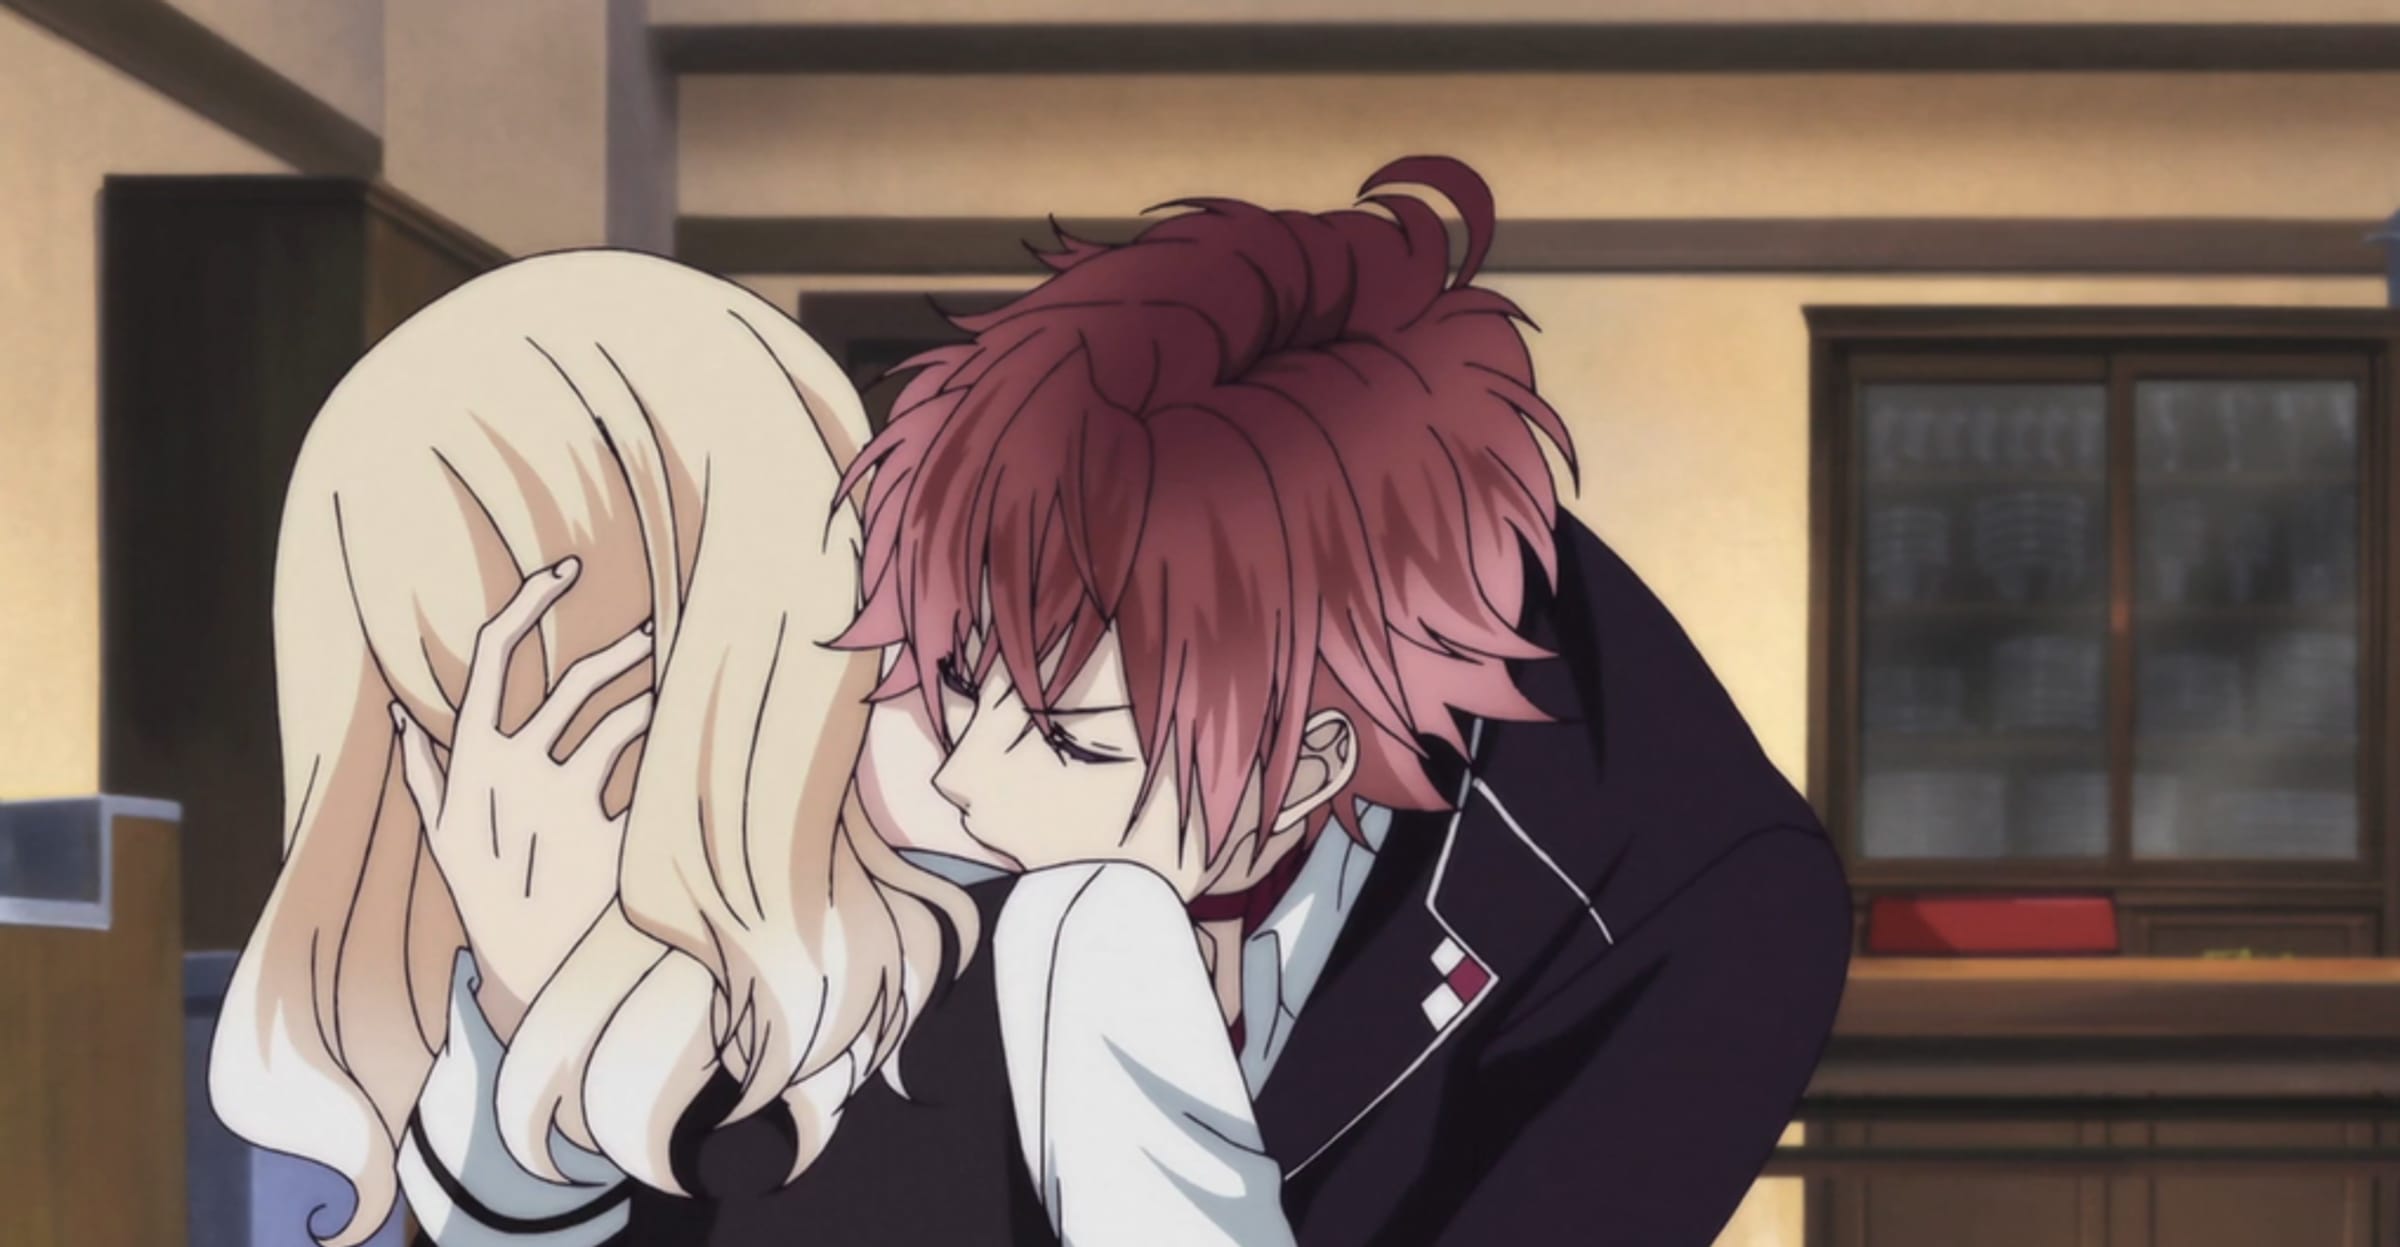 12 Anime Kisses That Made Our Hearts Soar